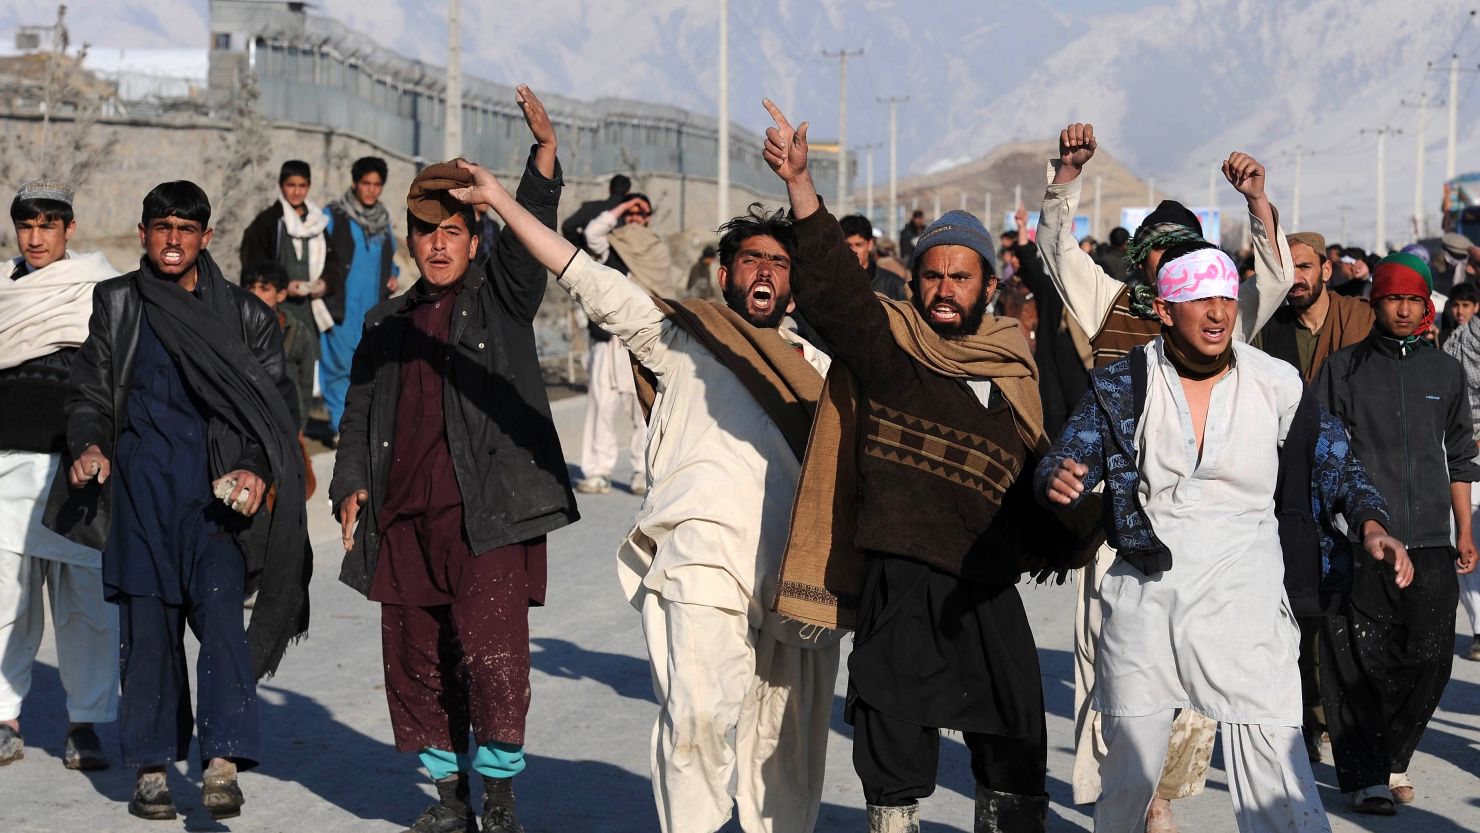 Afghan demonstrators shout during a protest against Quran desecration in Kabul on February 24, 2012.